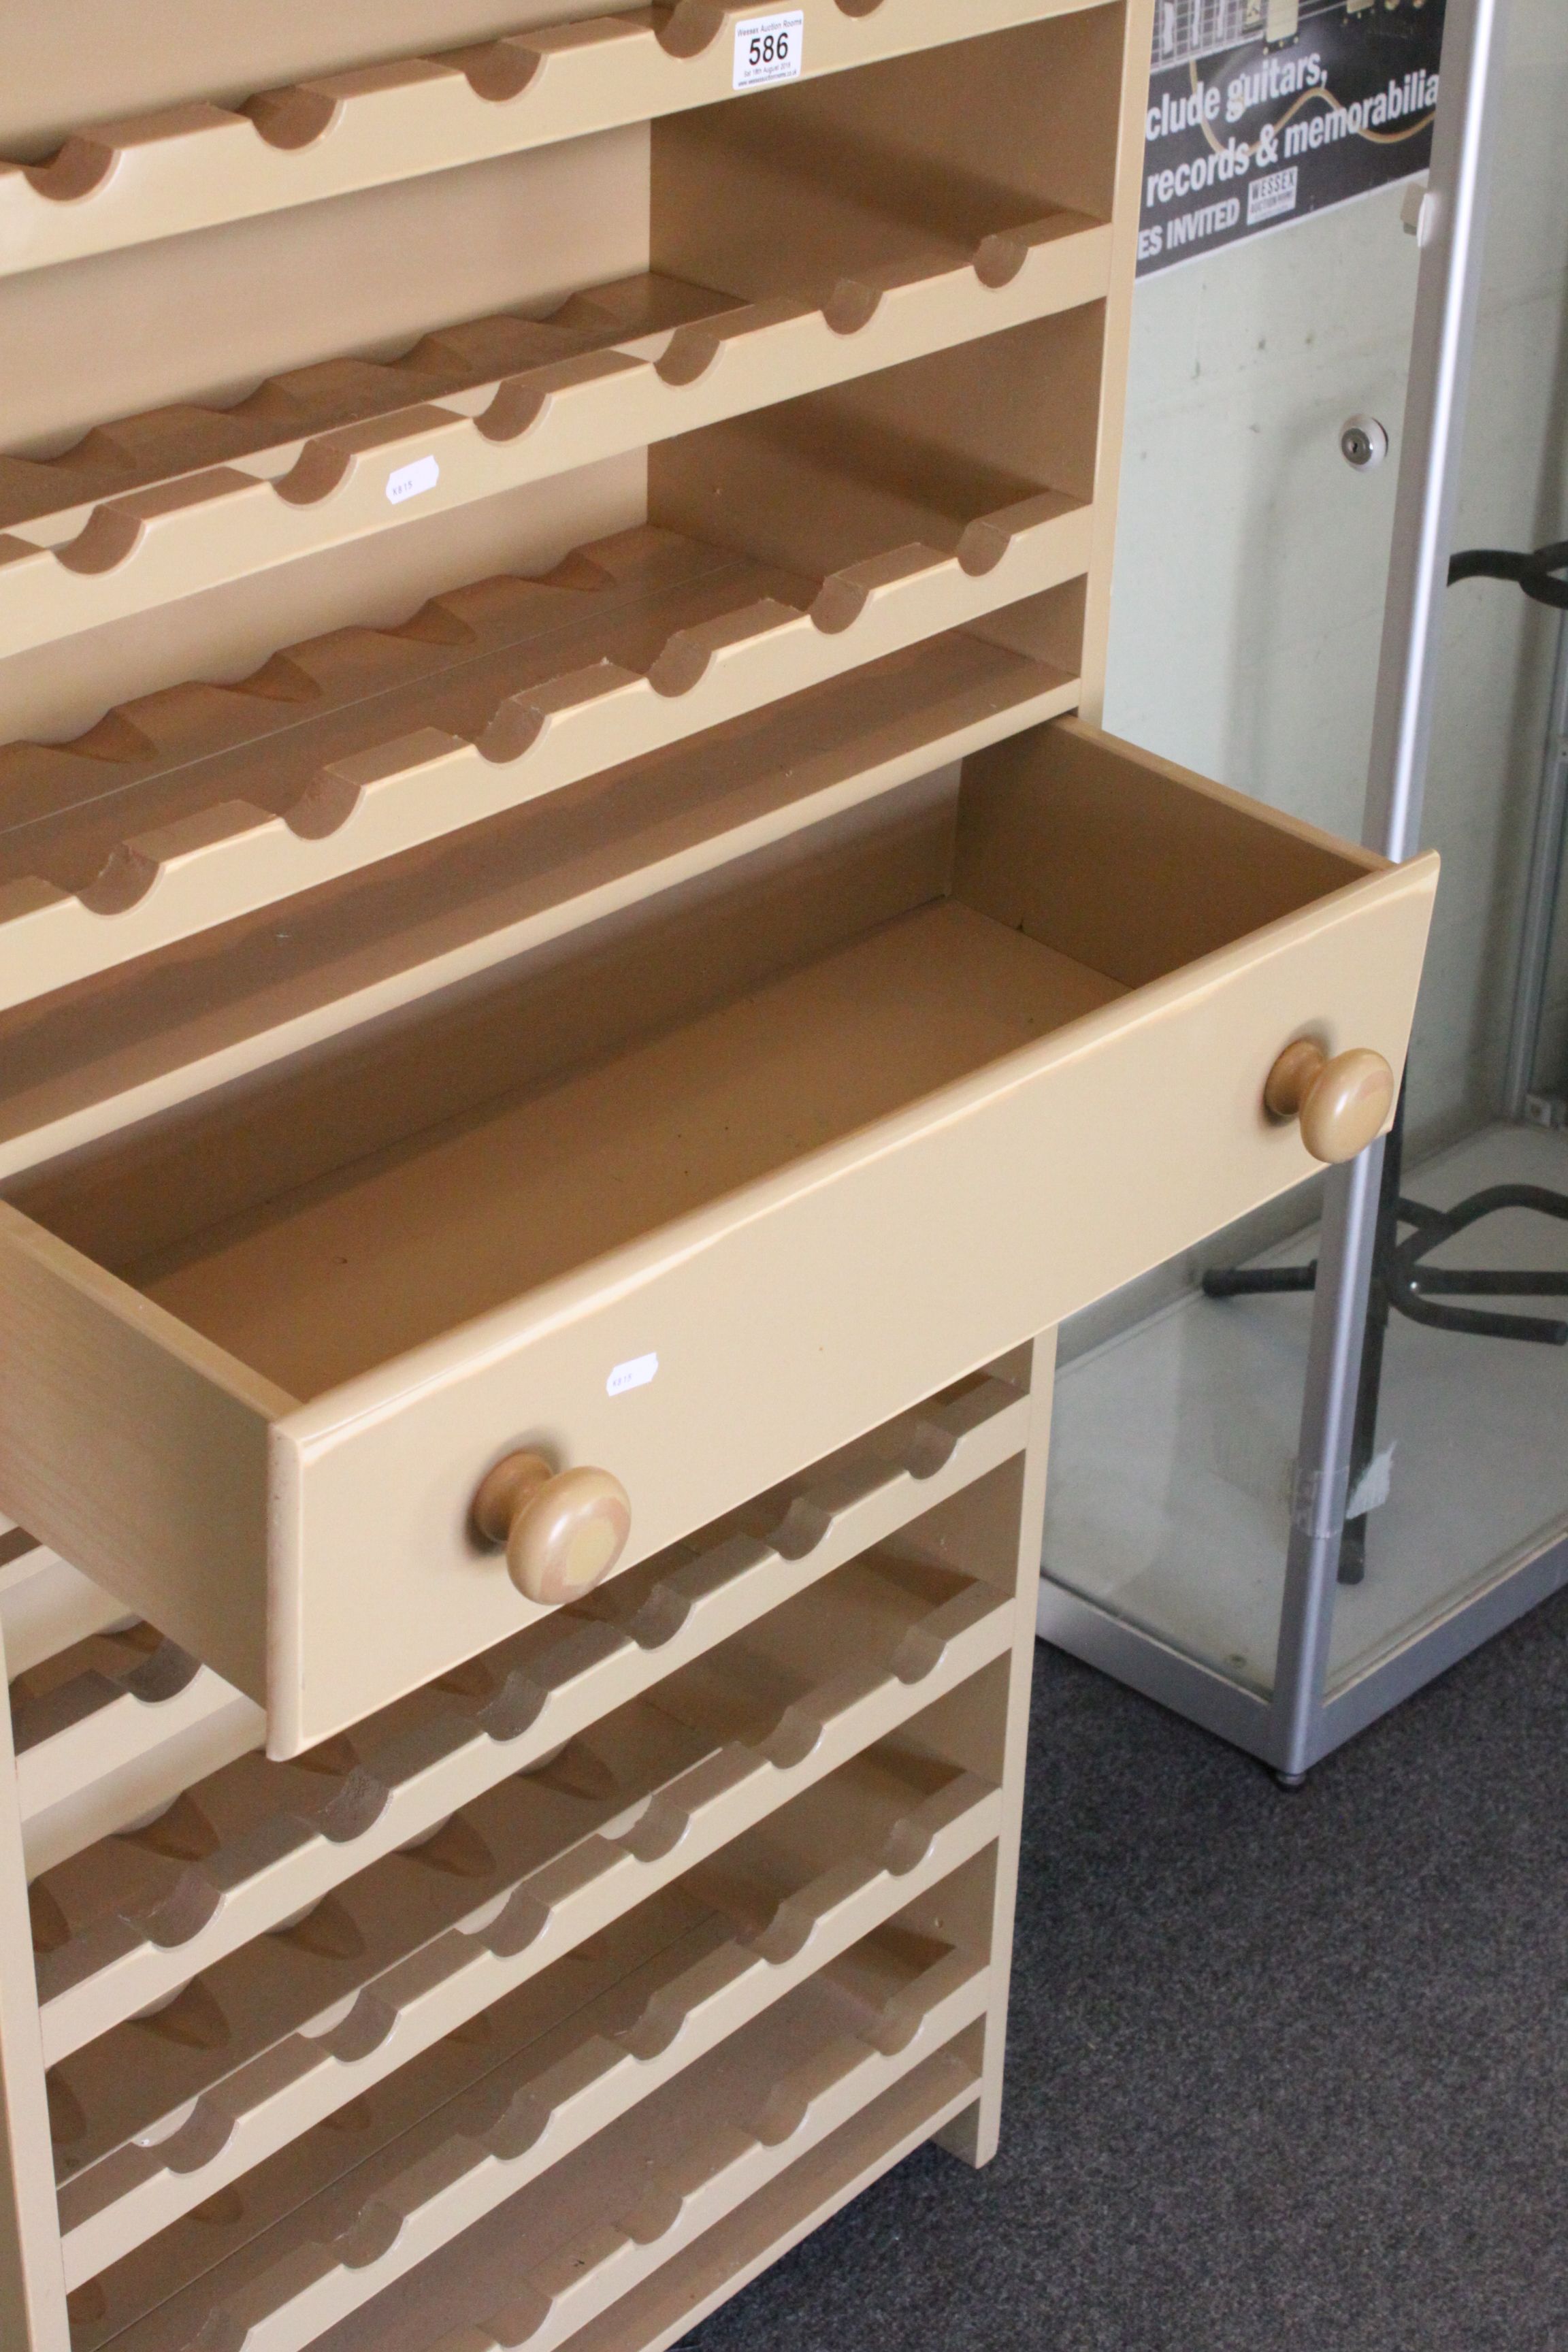 Contemporary 54 Wine Bottle Rack / Storage Unit with central drawer, approx. 169cm high x 68cm wide - Image 2 of 5